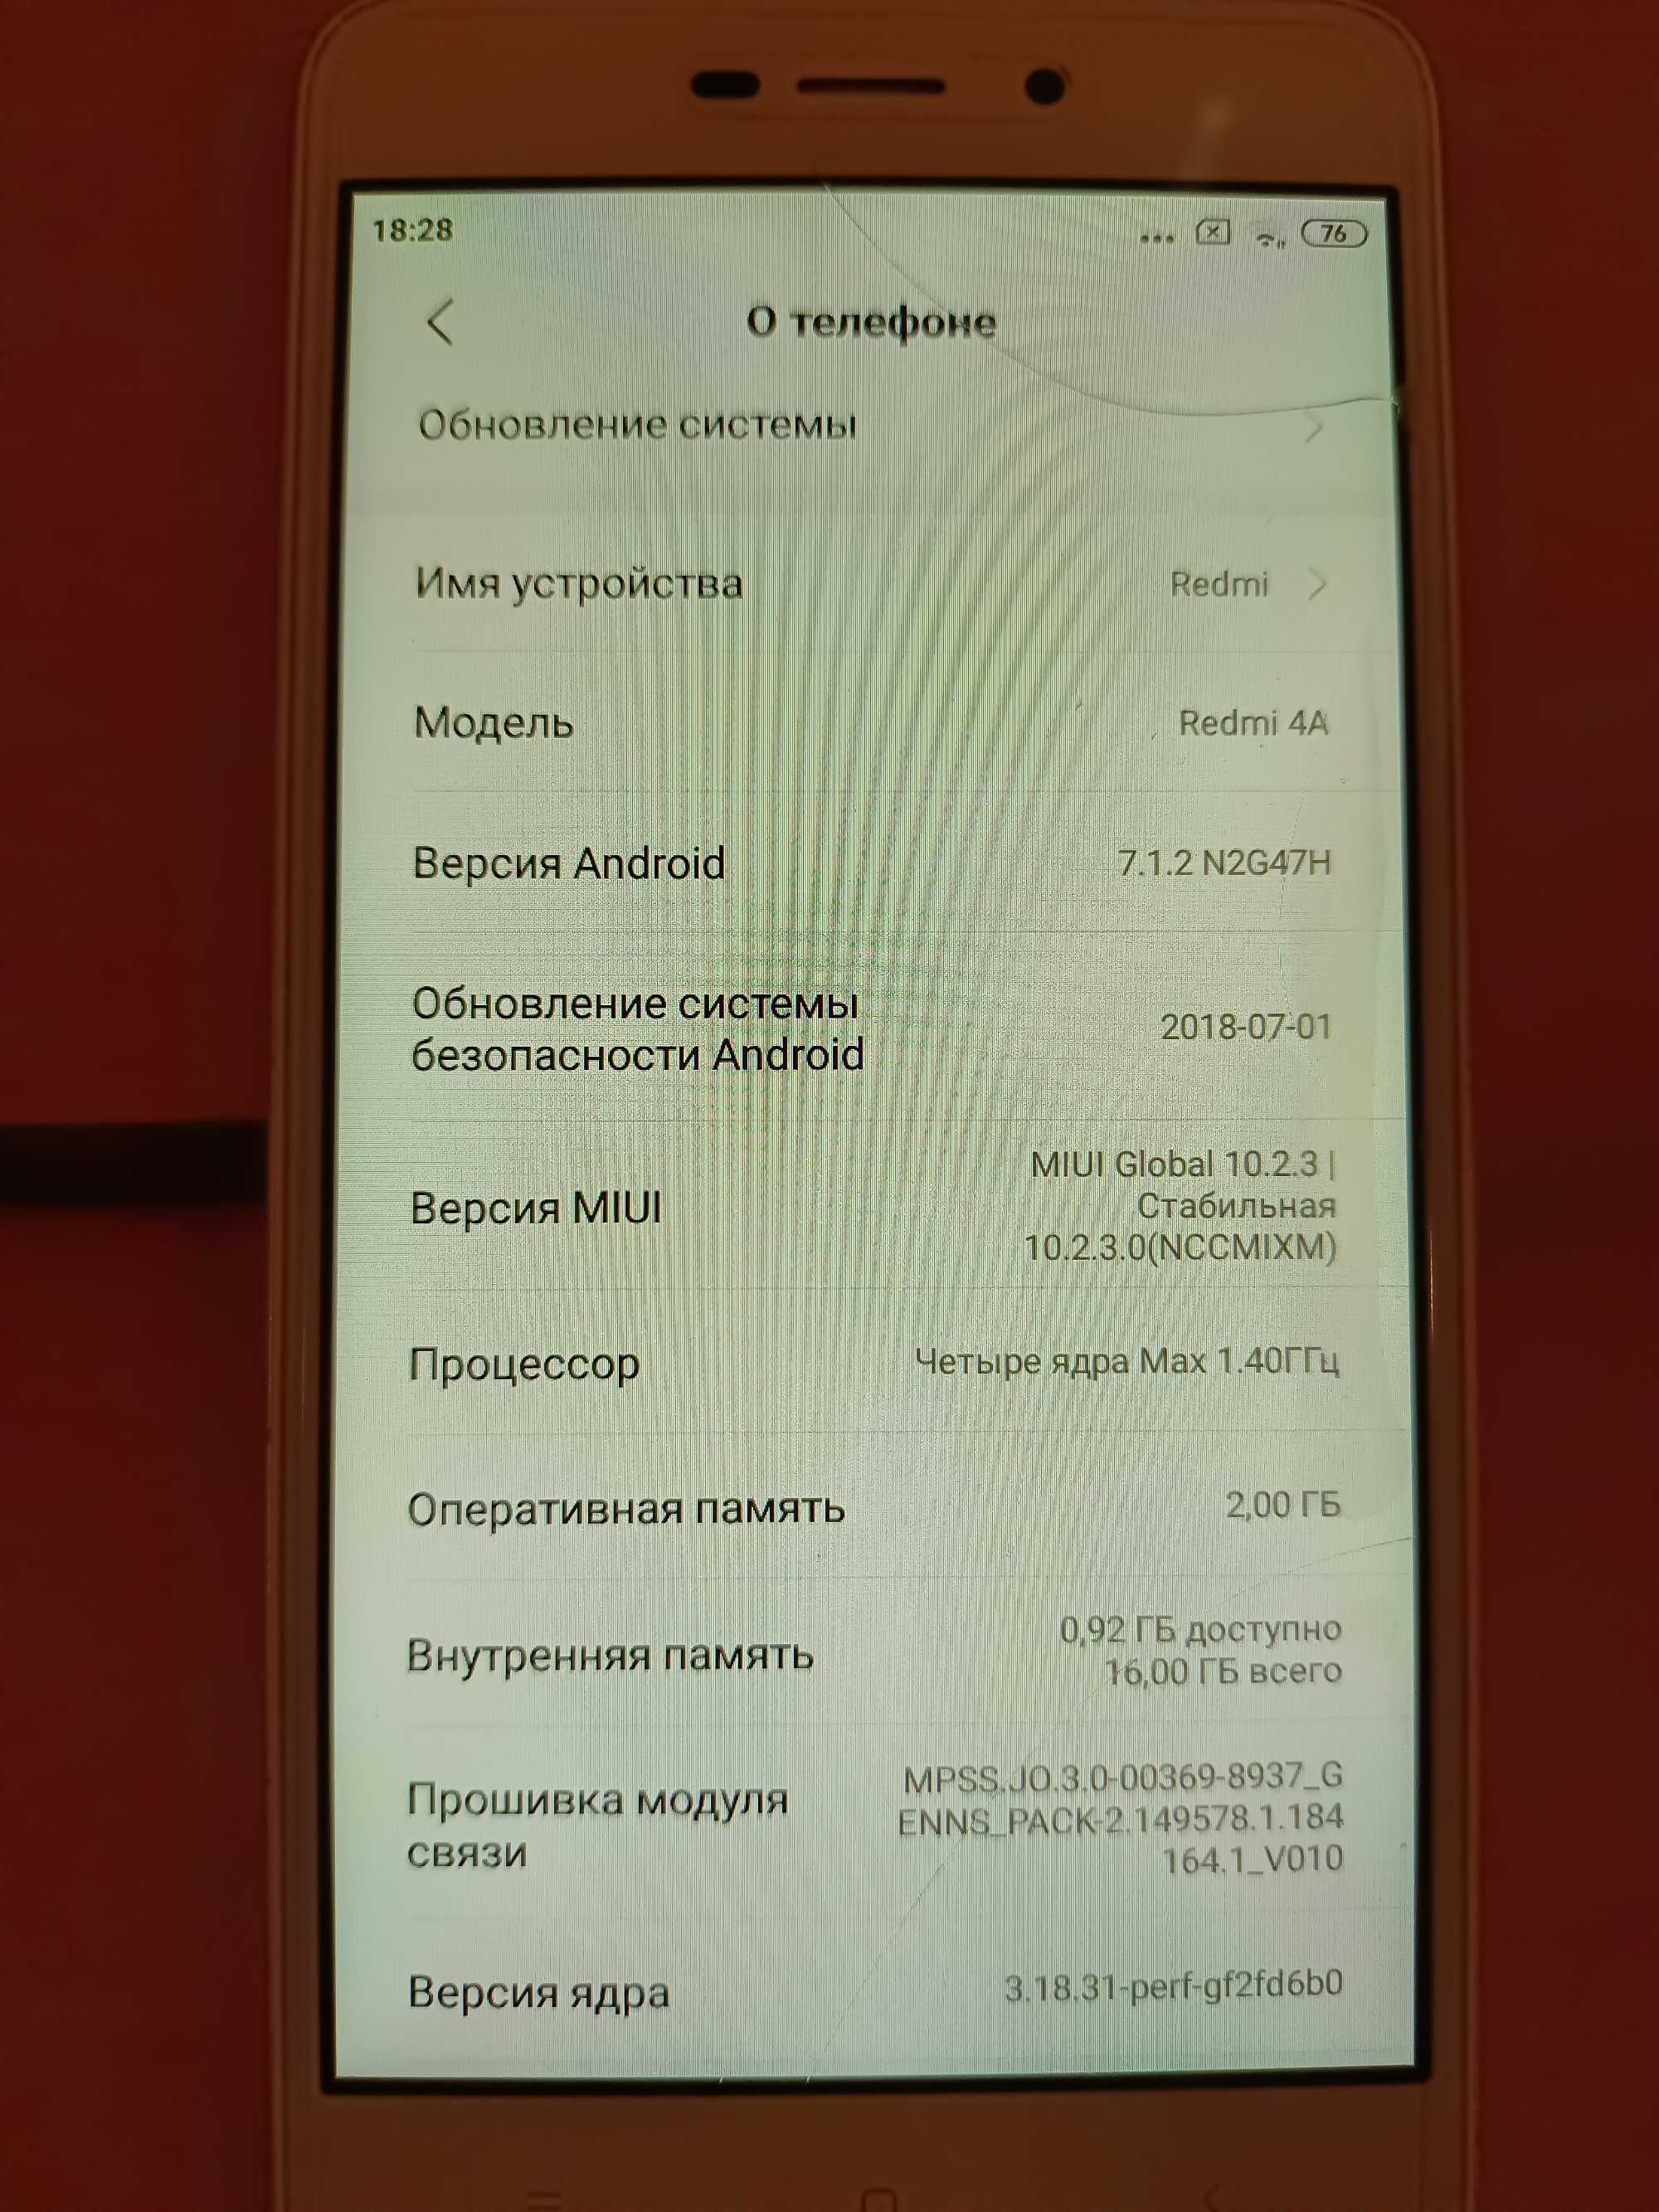 Redmi 4A  android 7.1.2